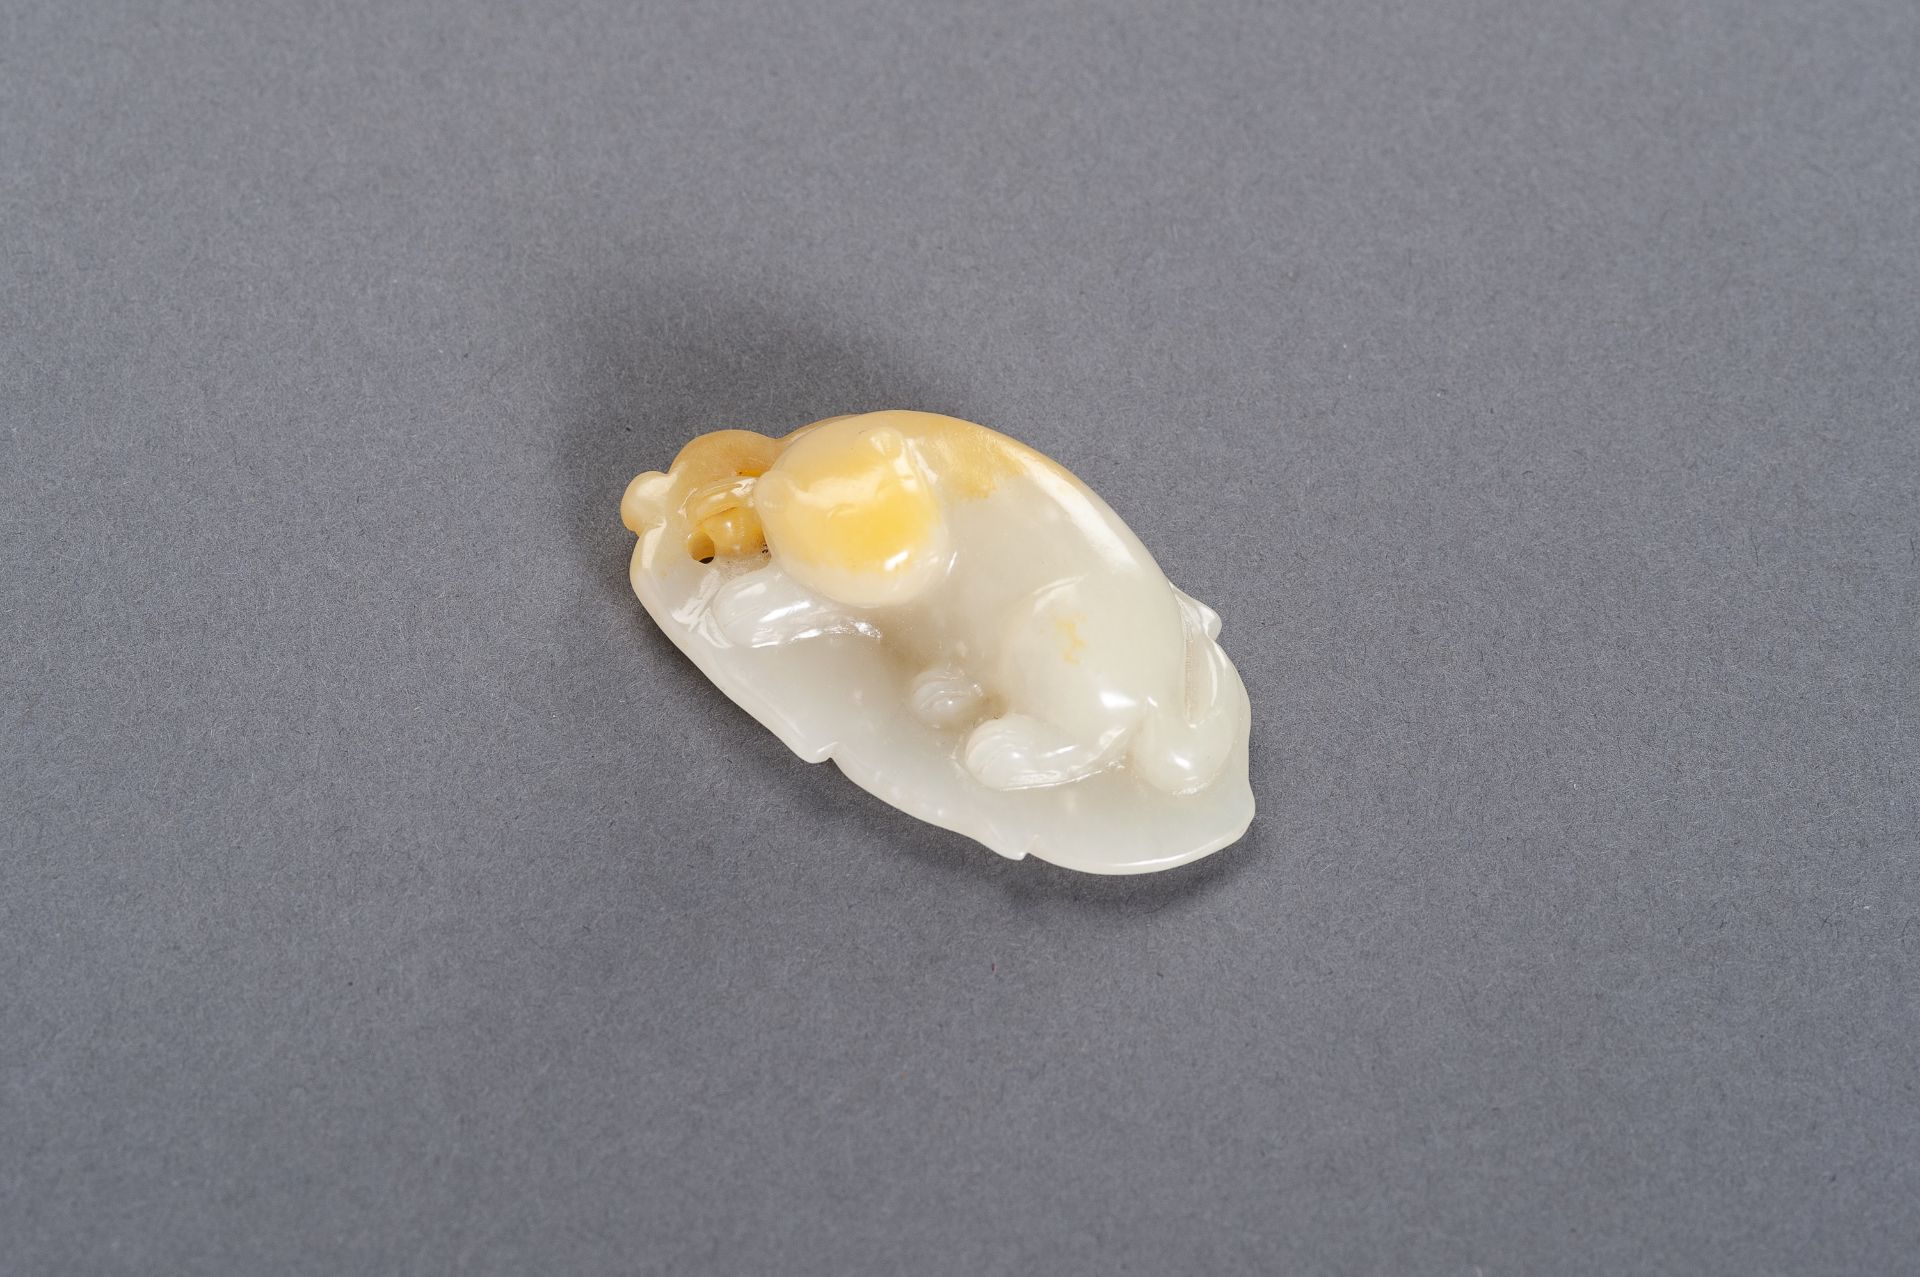 A CELADON AND YELLOW JADE 'CAT ON LEAF' PENDANT, LATE QING TO REPUBLIC